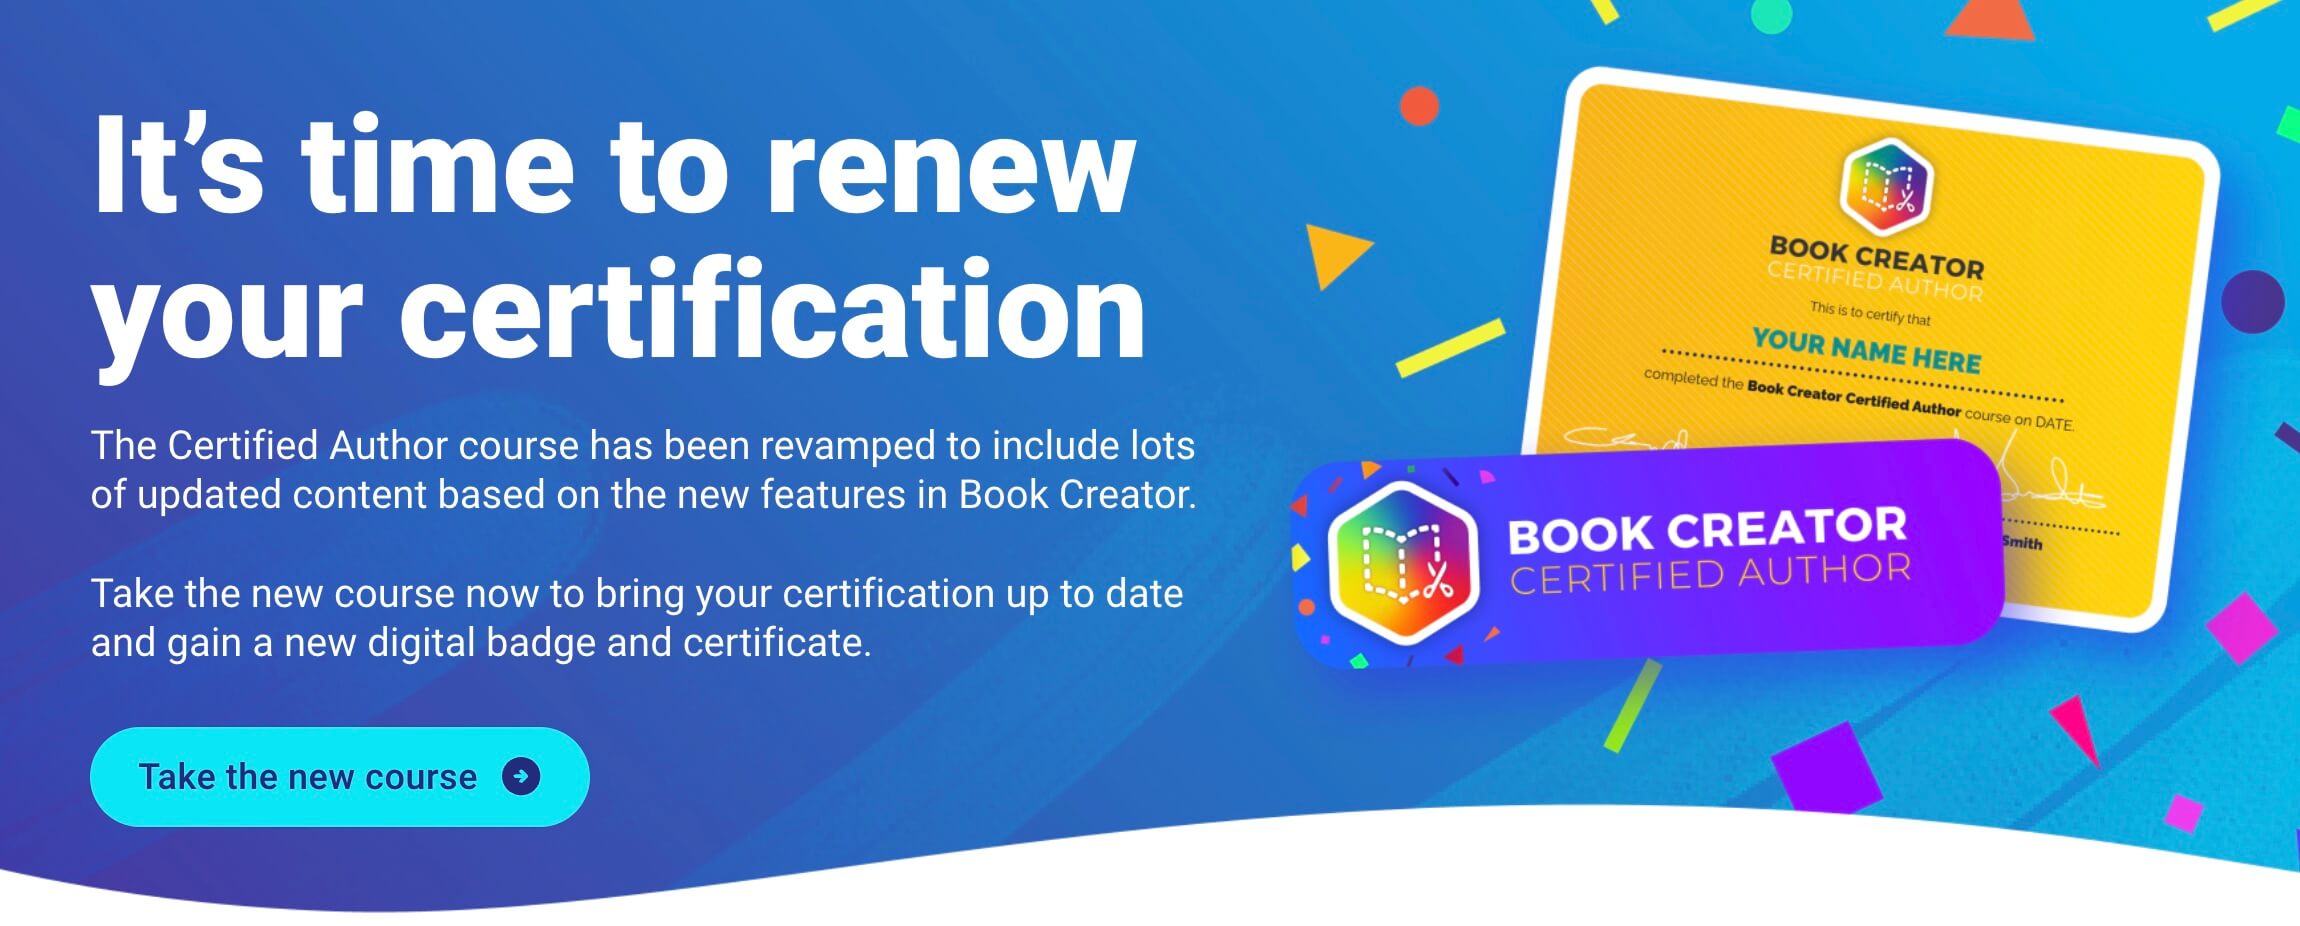 It's time to renew your certification